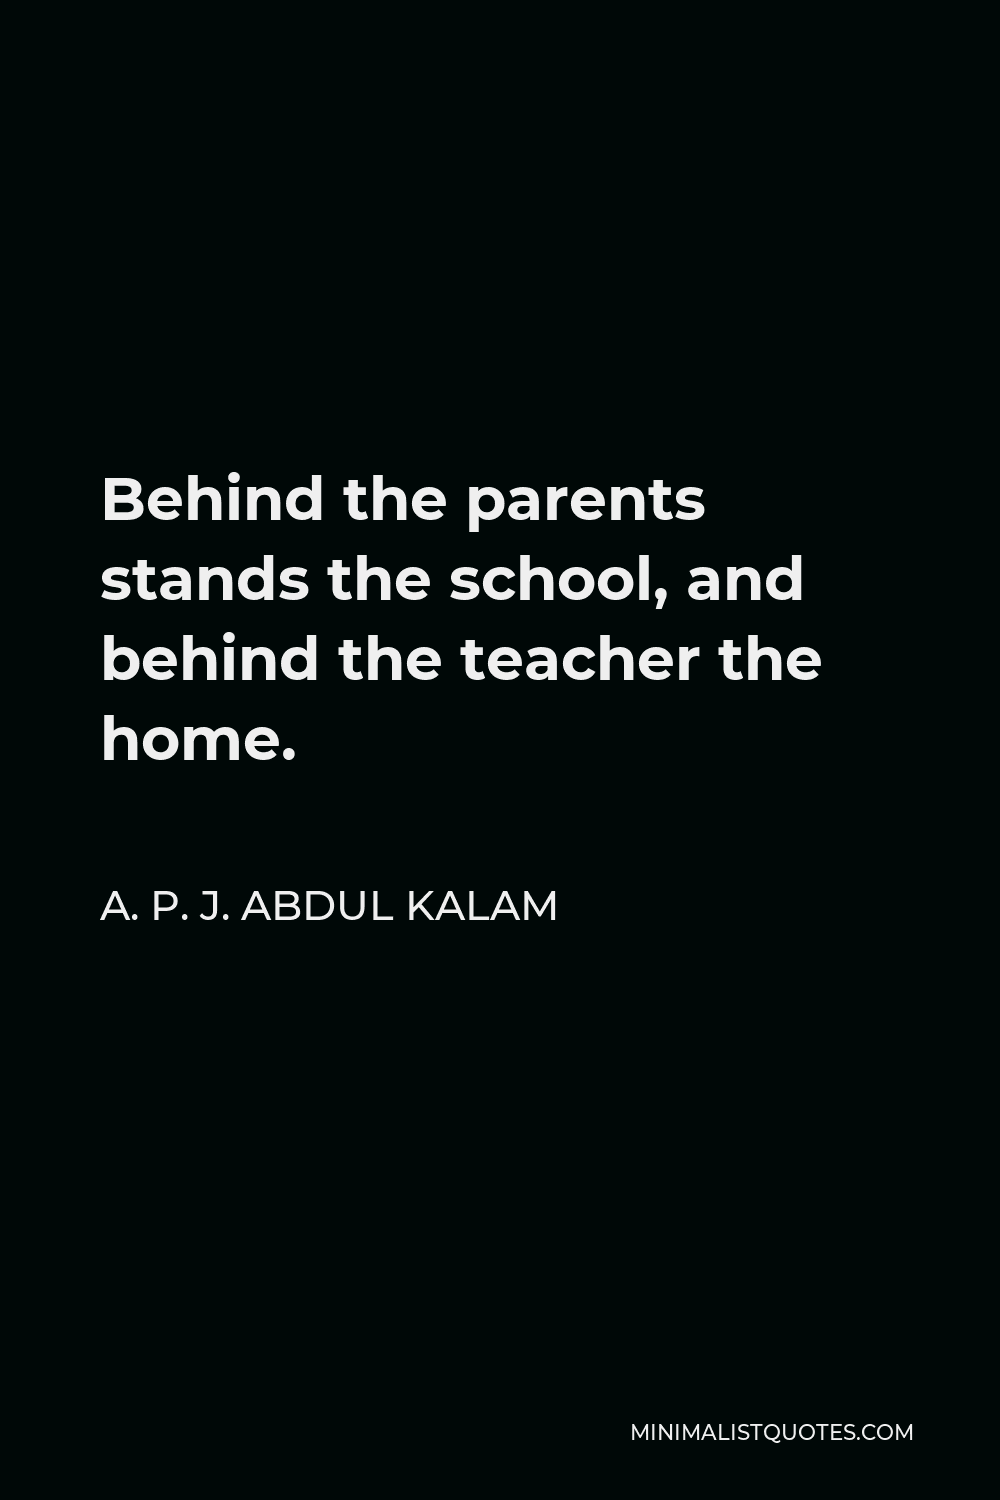 A. P. J. Abdul Kalam Quote: Behind the parents stands the school ...